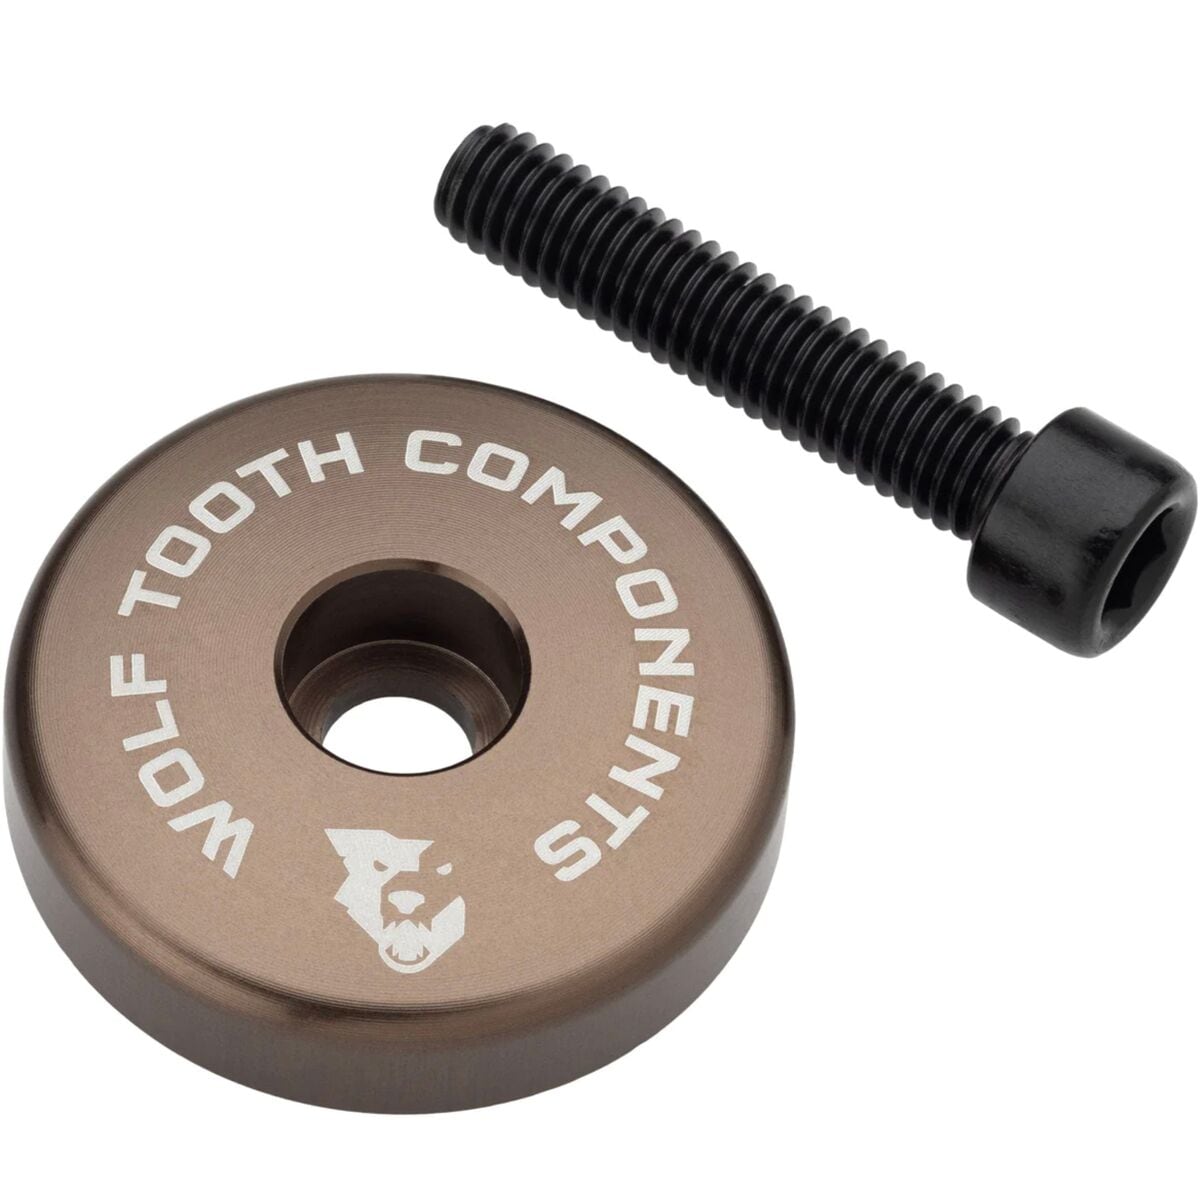 Wolf Tooth Components Stem Cap with Spacer - Limited Edition